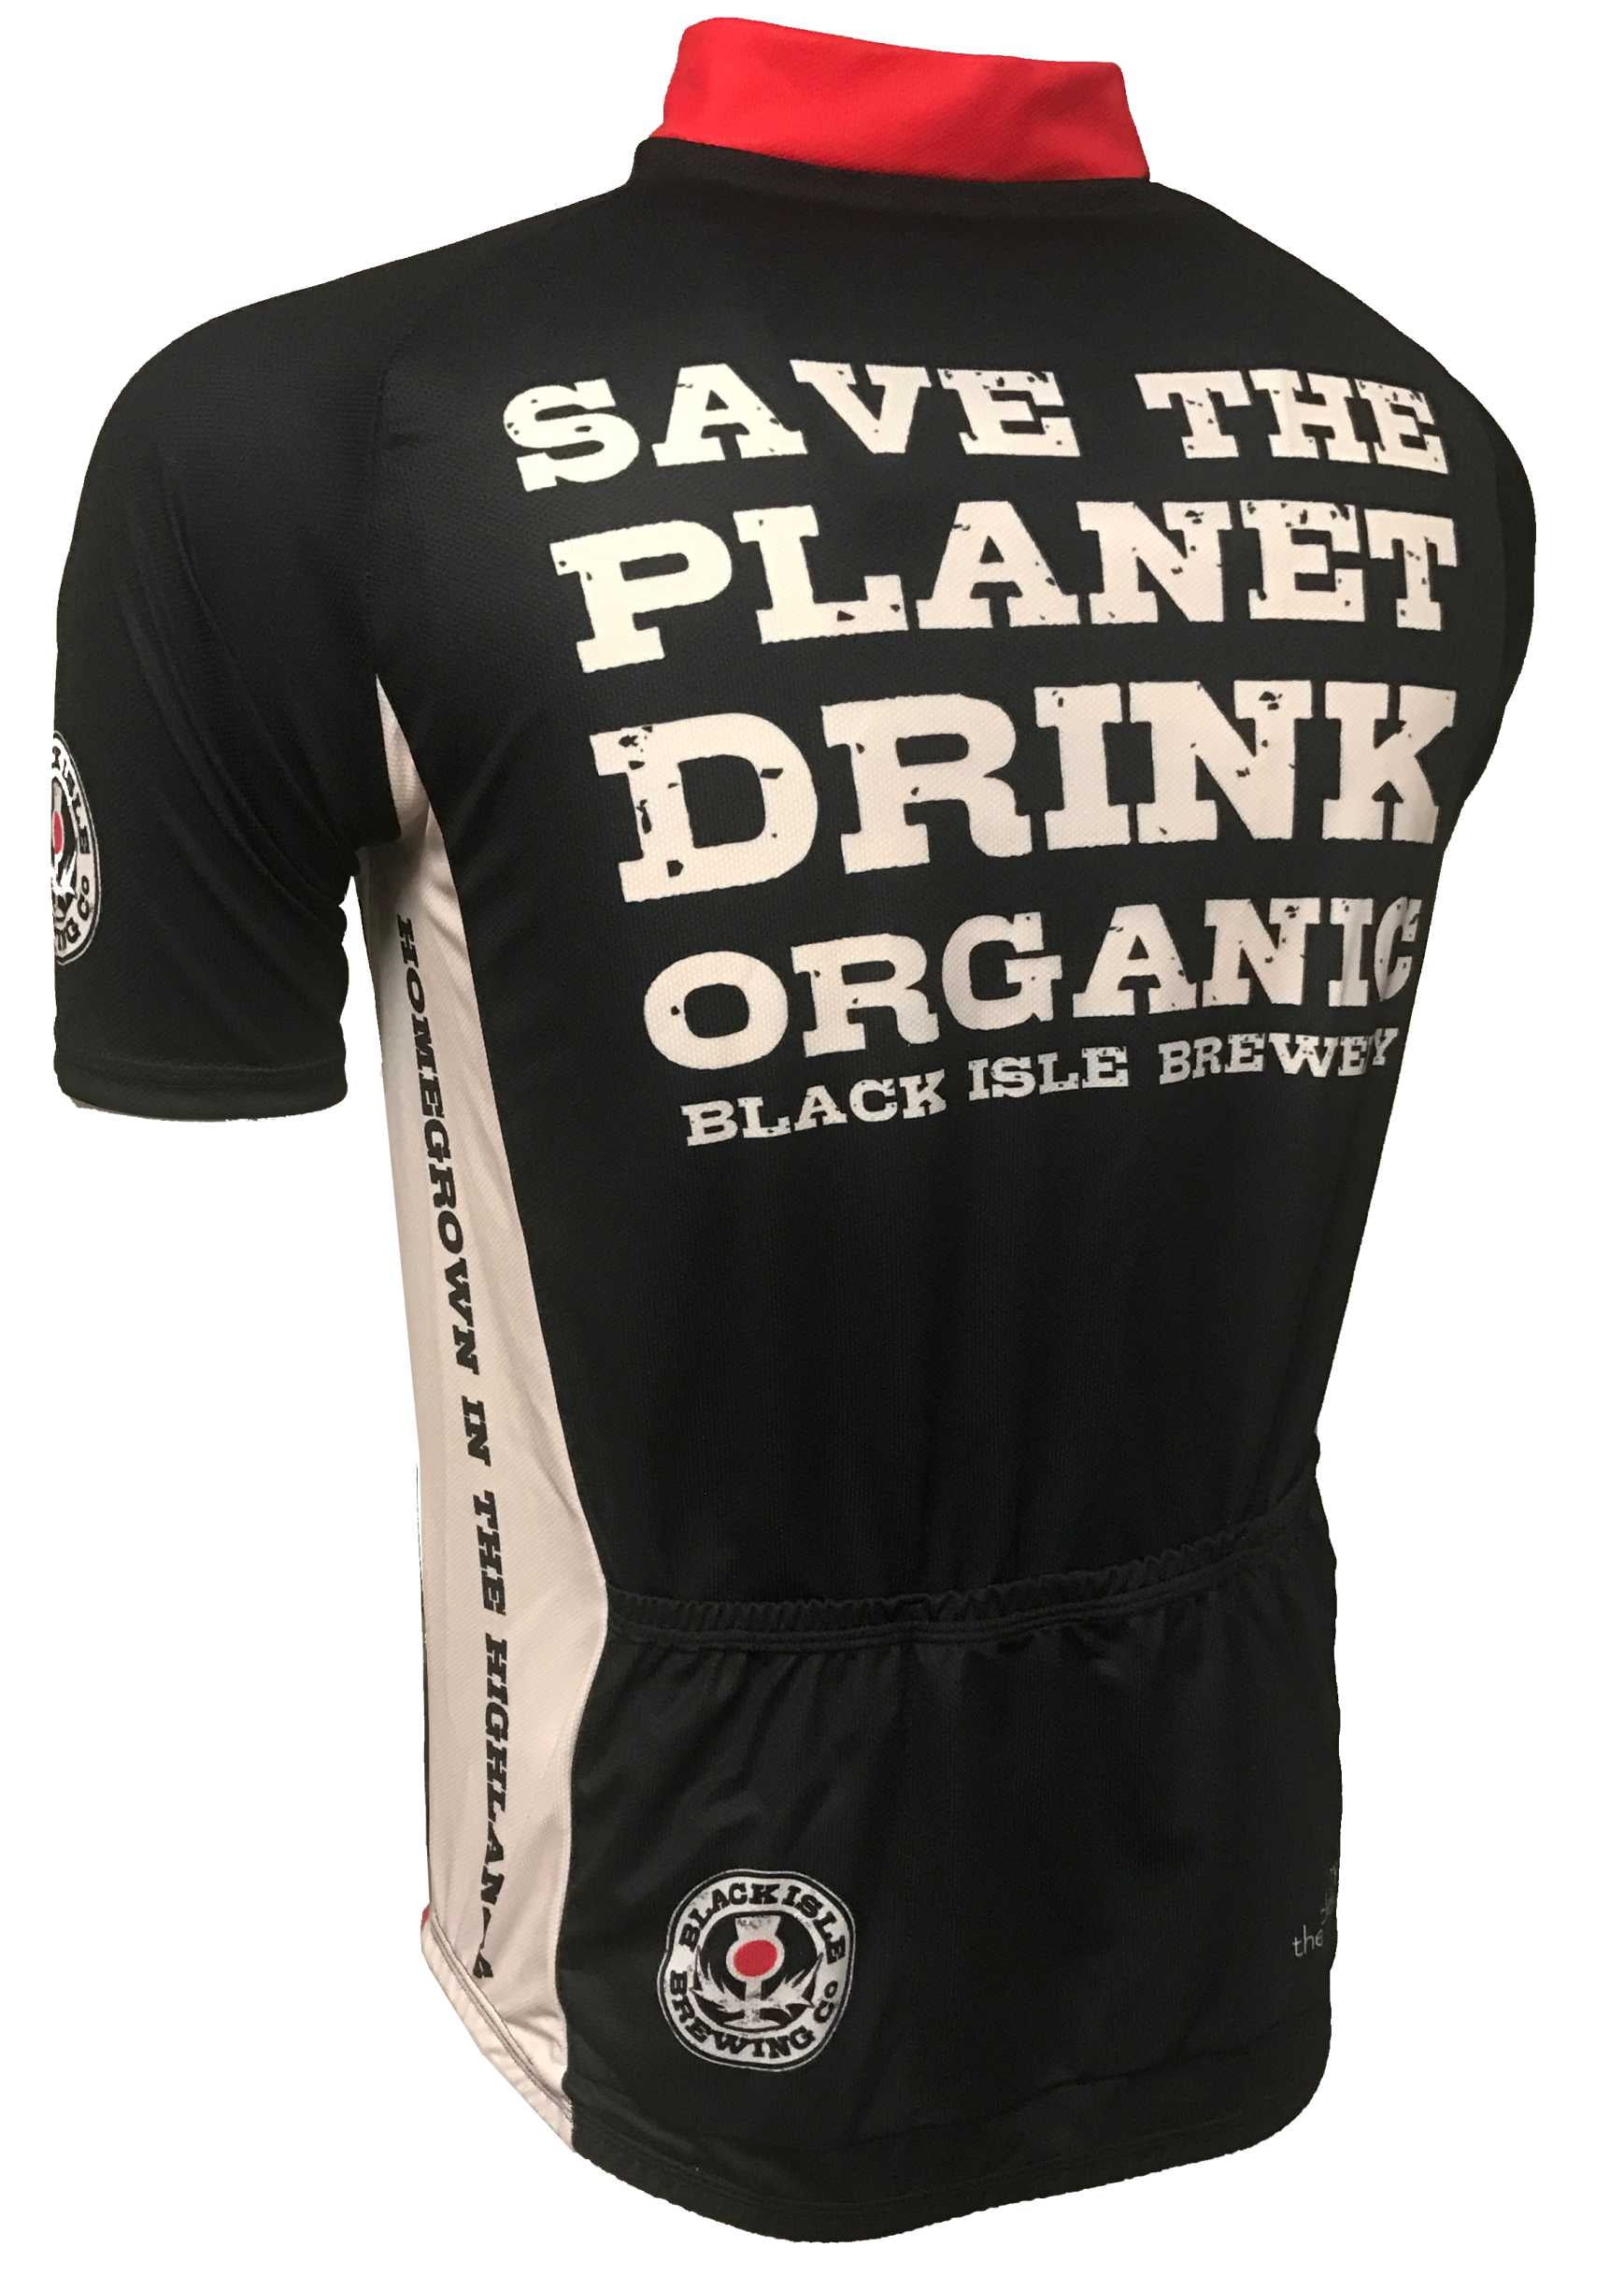 Black Isle Brewery Road Cycle Jersey Back 